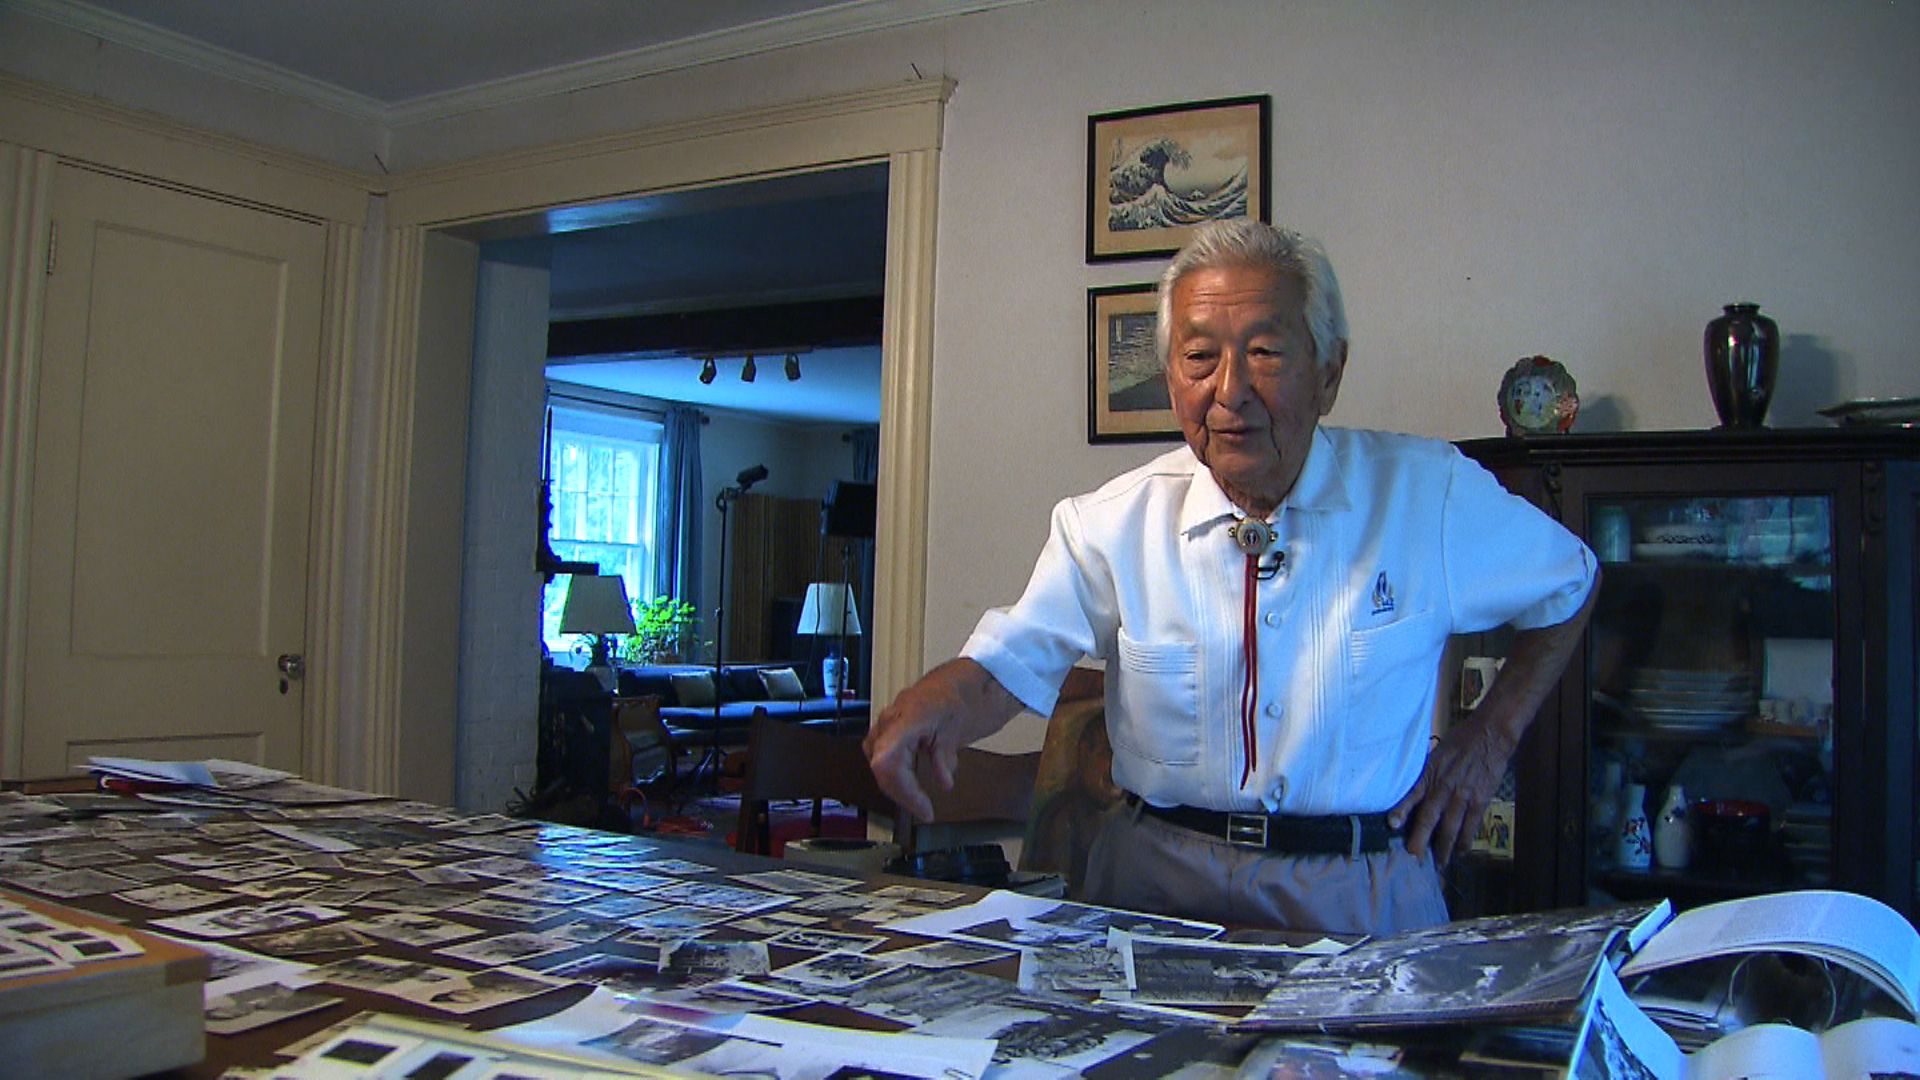 Susumu Ito displays the large number of photos he took in Europe during his US Army service in WWII